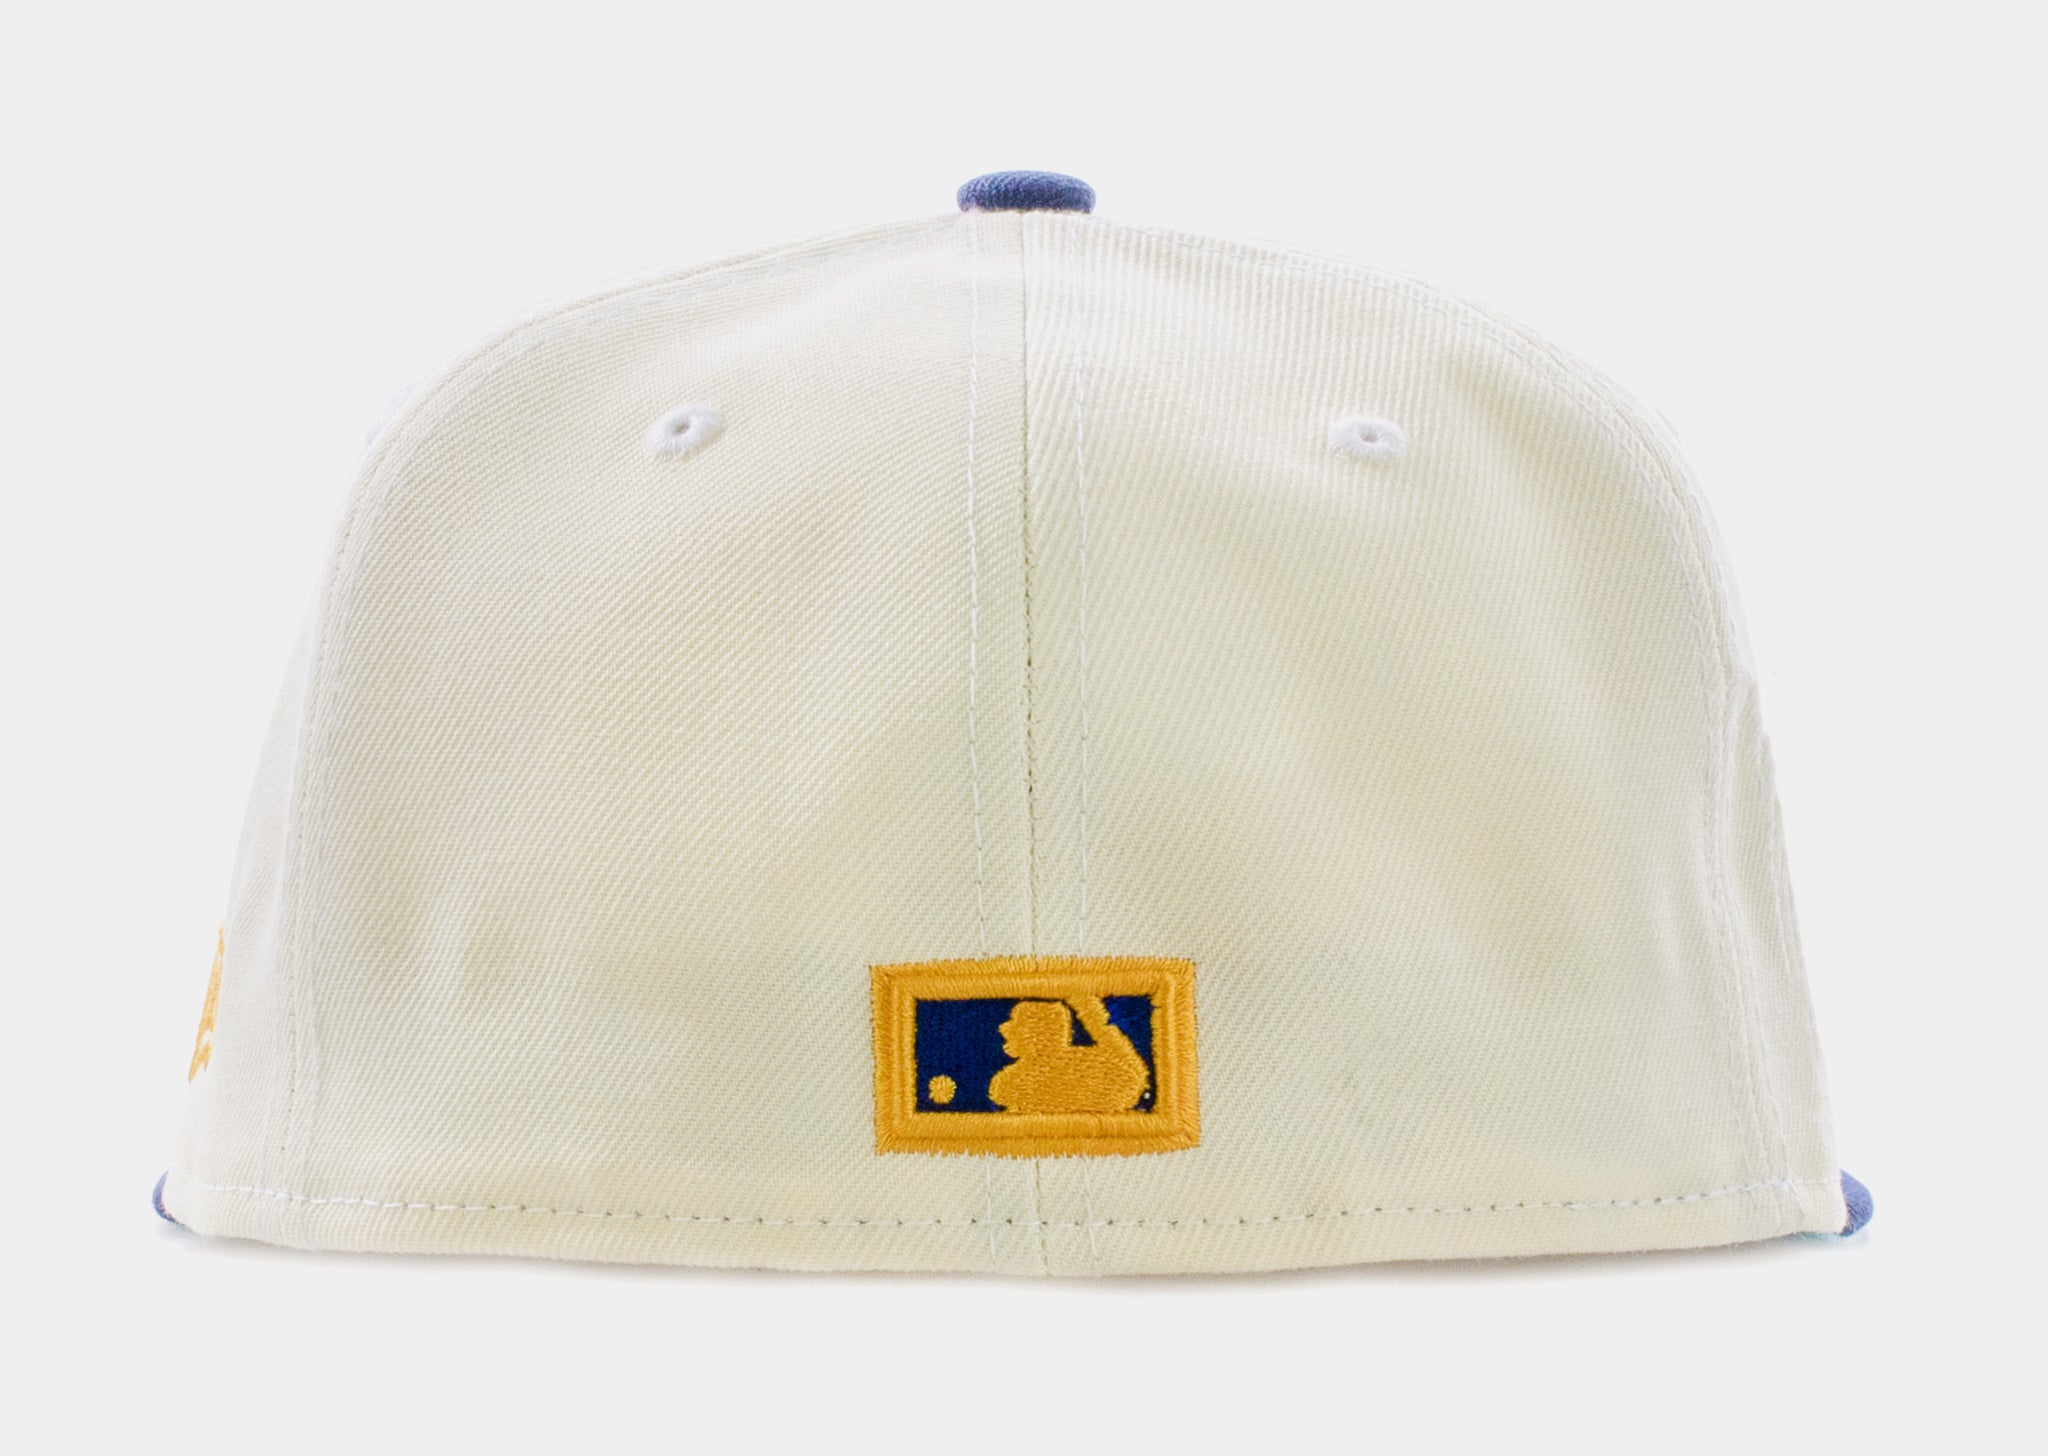 New Era Cap - Fit to say thanks. The MLB Father's Day